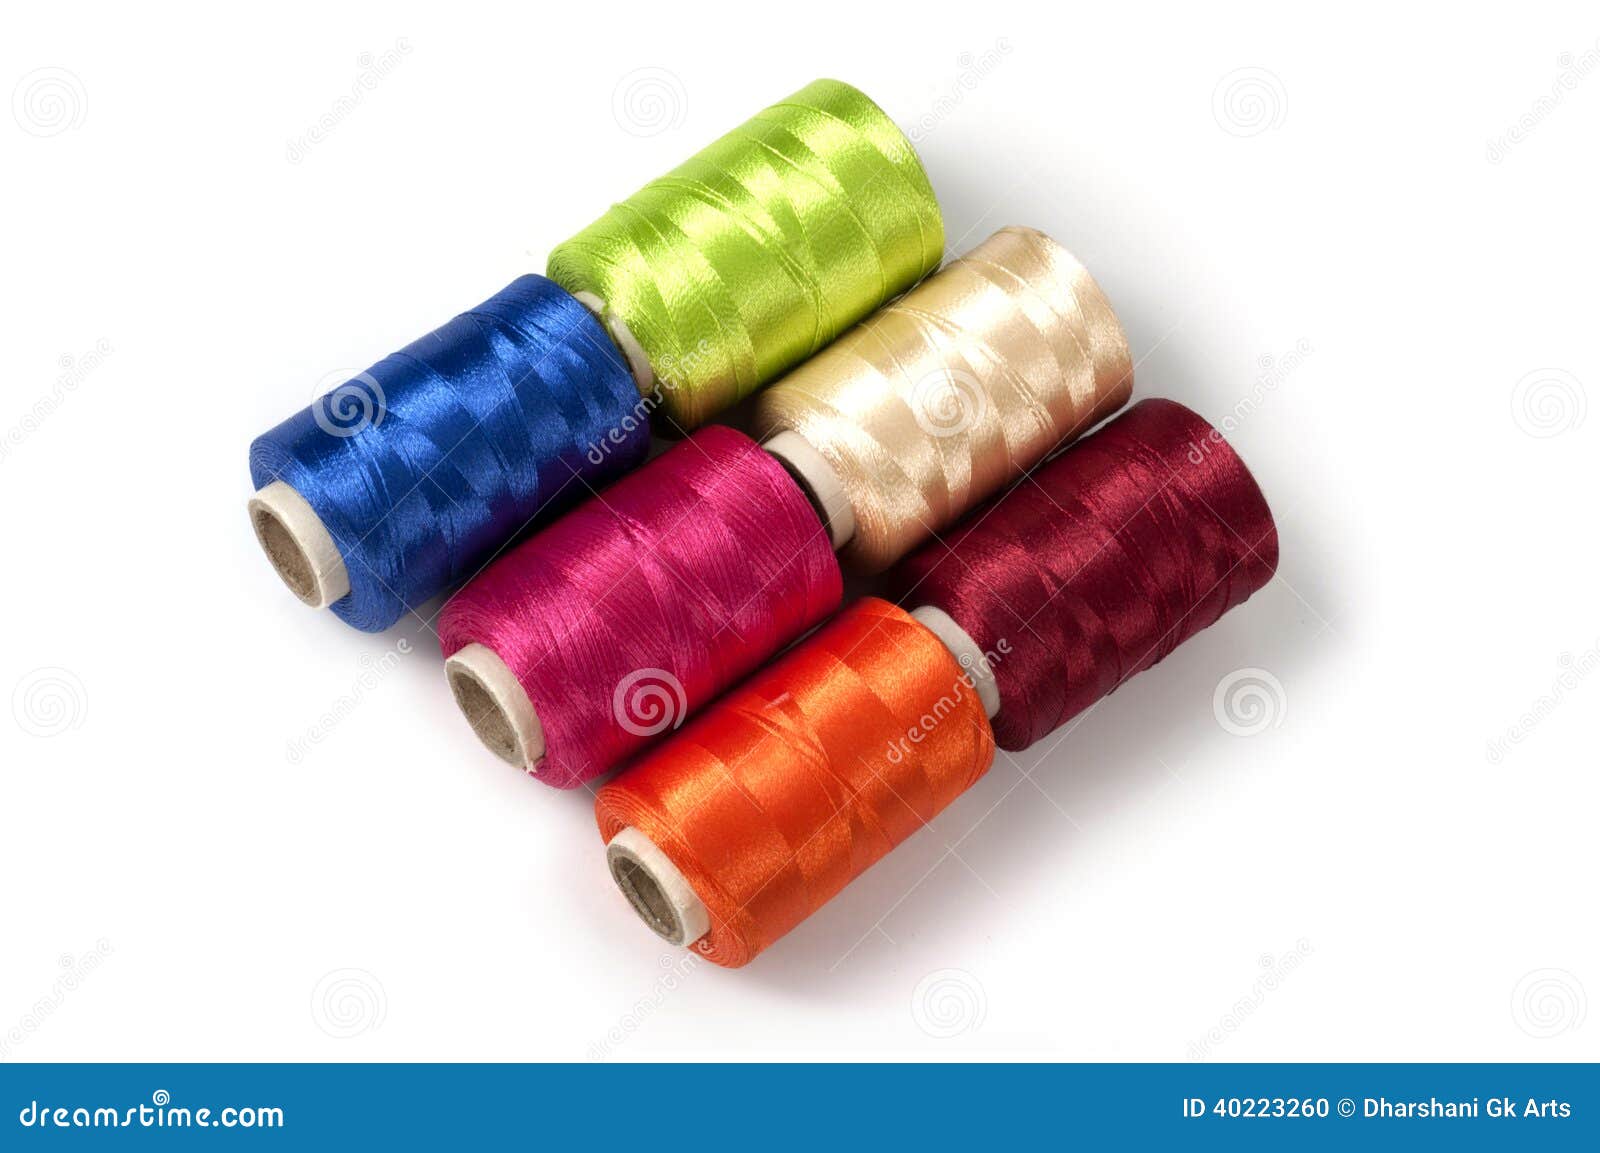 sewing rayon threads